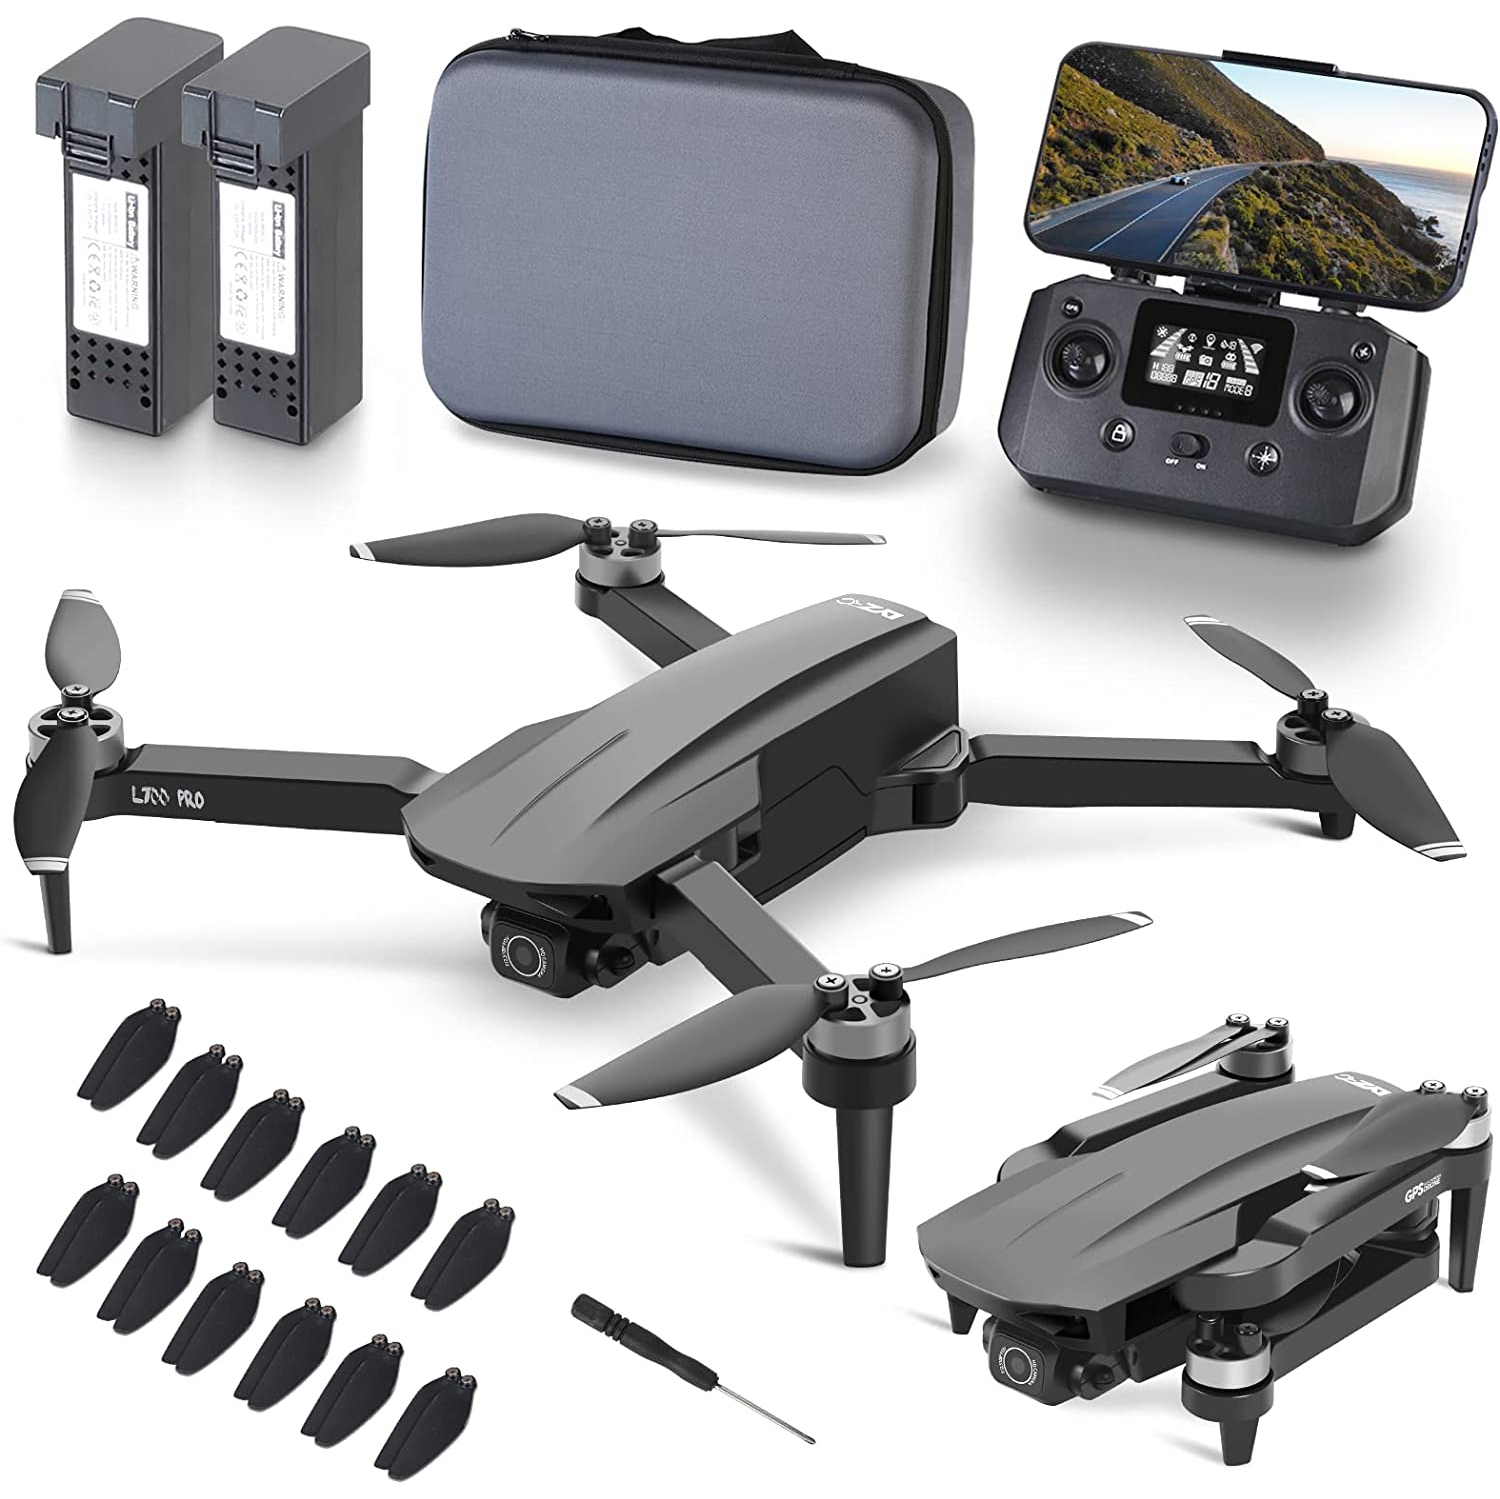 NMY Drones with Camera for Adults 4k, 5G WIFI FPV Transmission Drone, 30mins Flight Time on 2 Batteries, Brushless Motor, Mobile Phone Control, Multiple Flight Modes, Suitable for